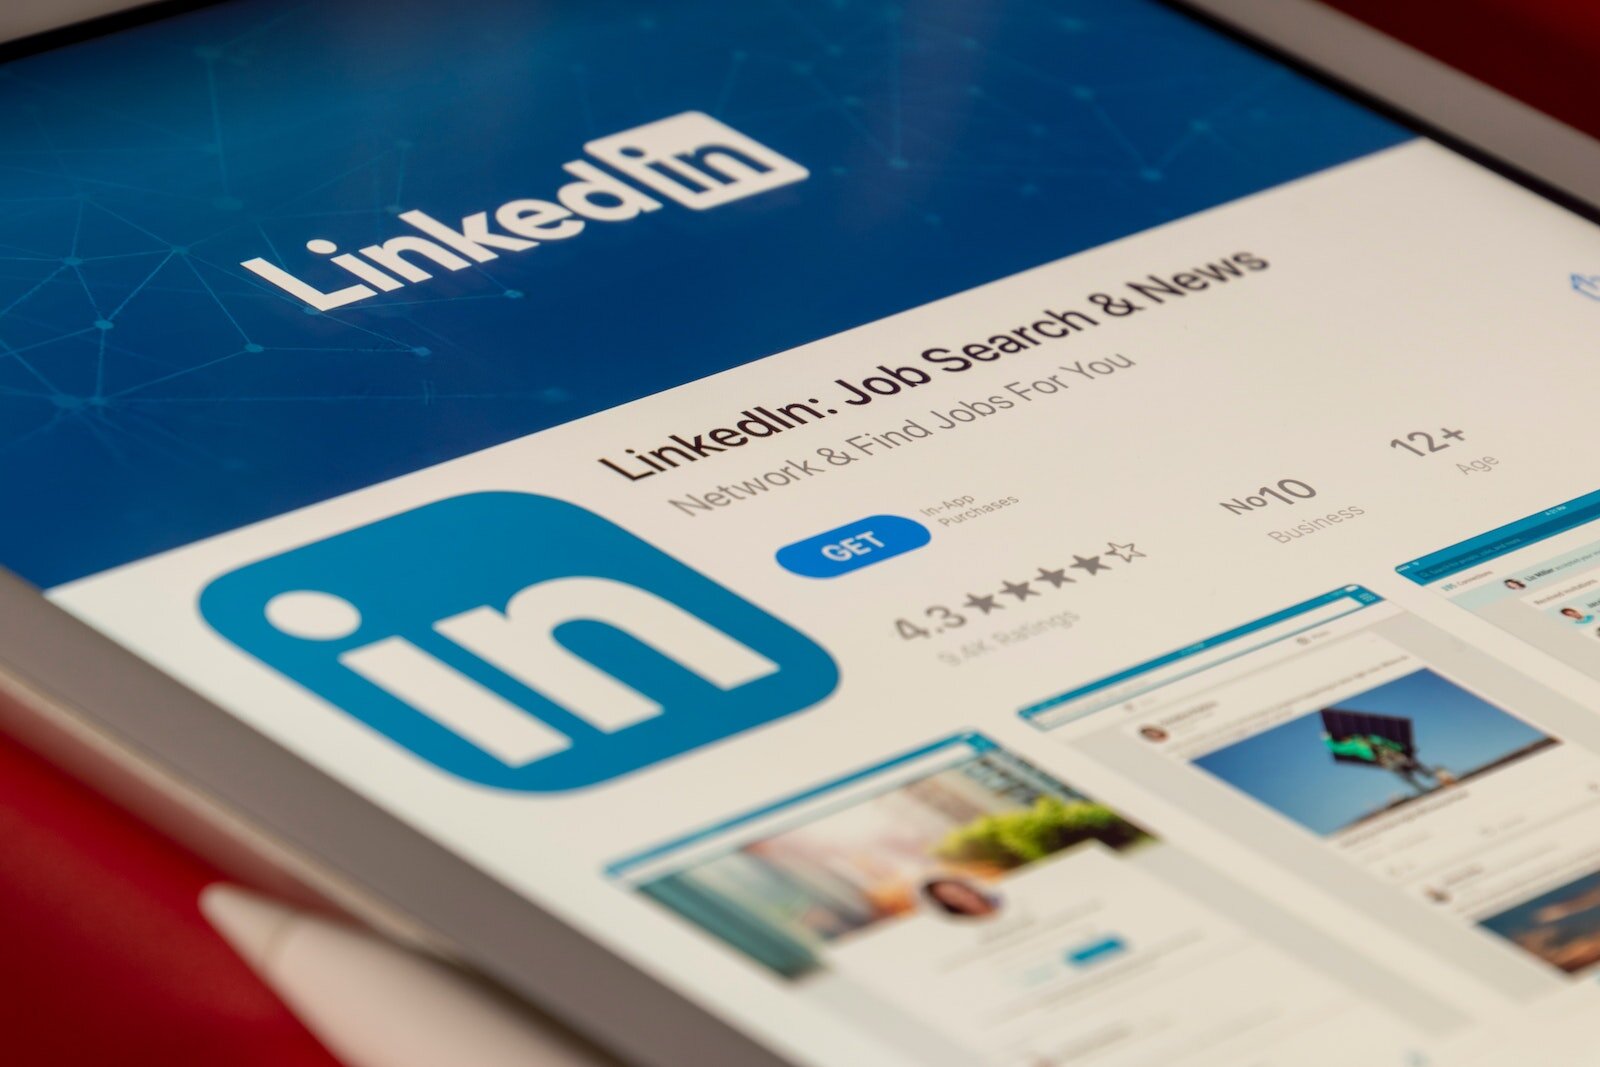 LinkedIn has been seeing growth during the pandemic workforce shakeup.